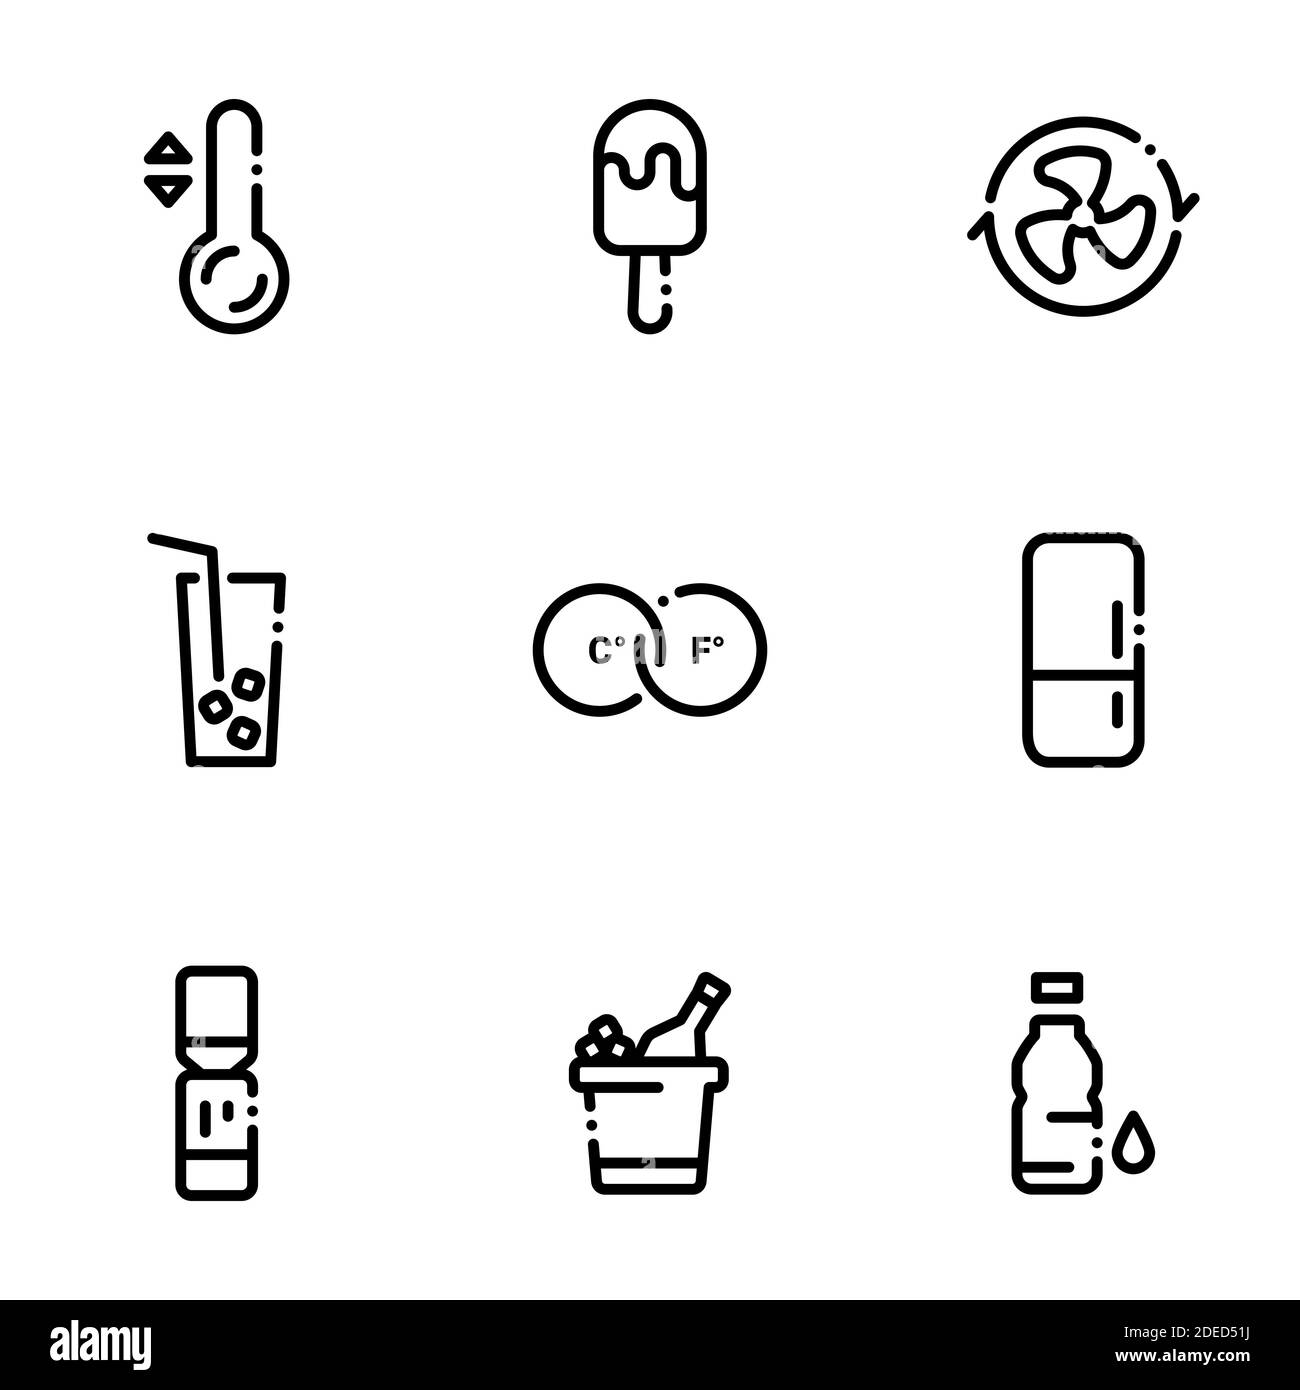 Set of black icons isolated on white background, on theme Cold drinks, ice cream and cooling systems Stock Vector